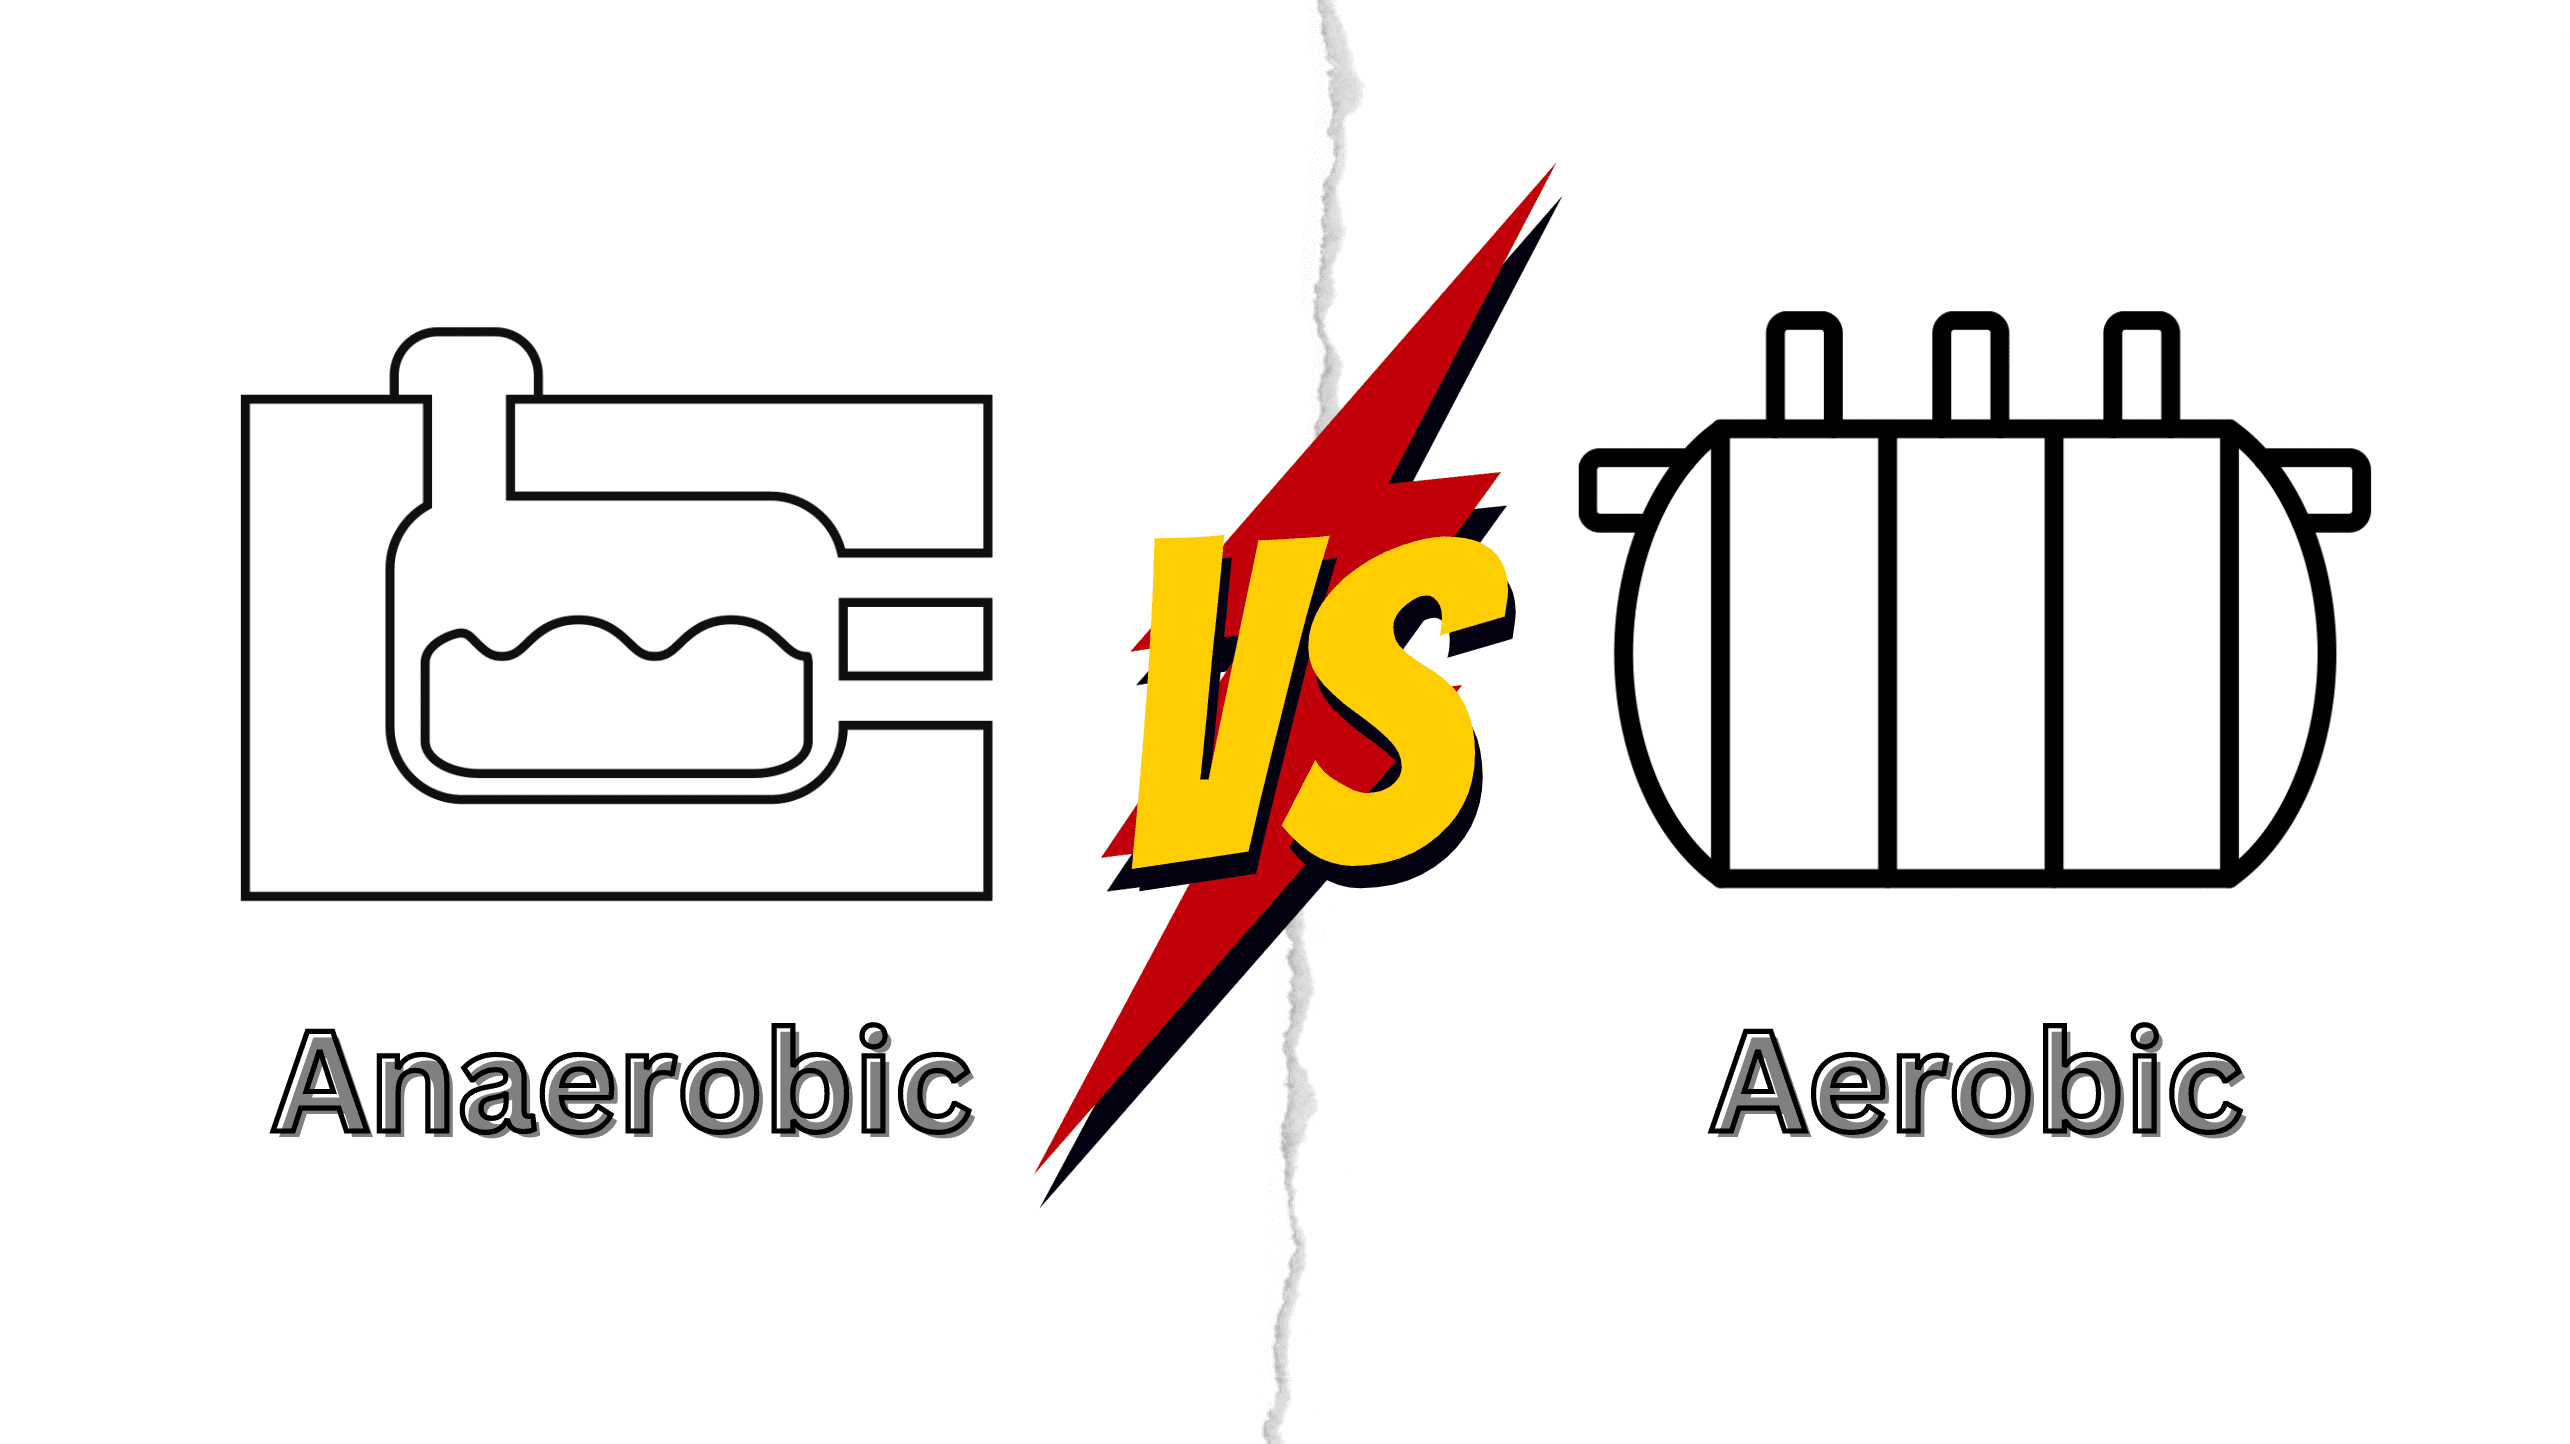 Anaerobic Vs Aerobic Septic Systems- What’s the Difference?